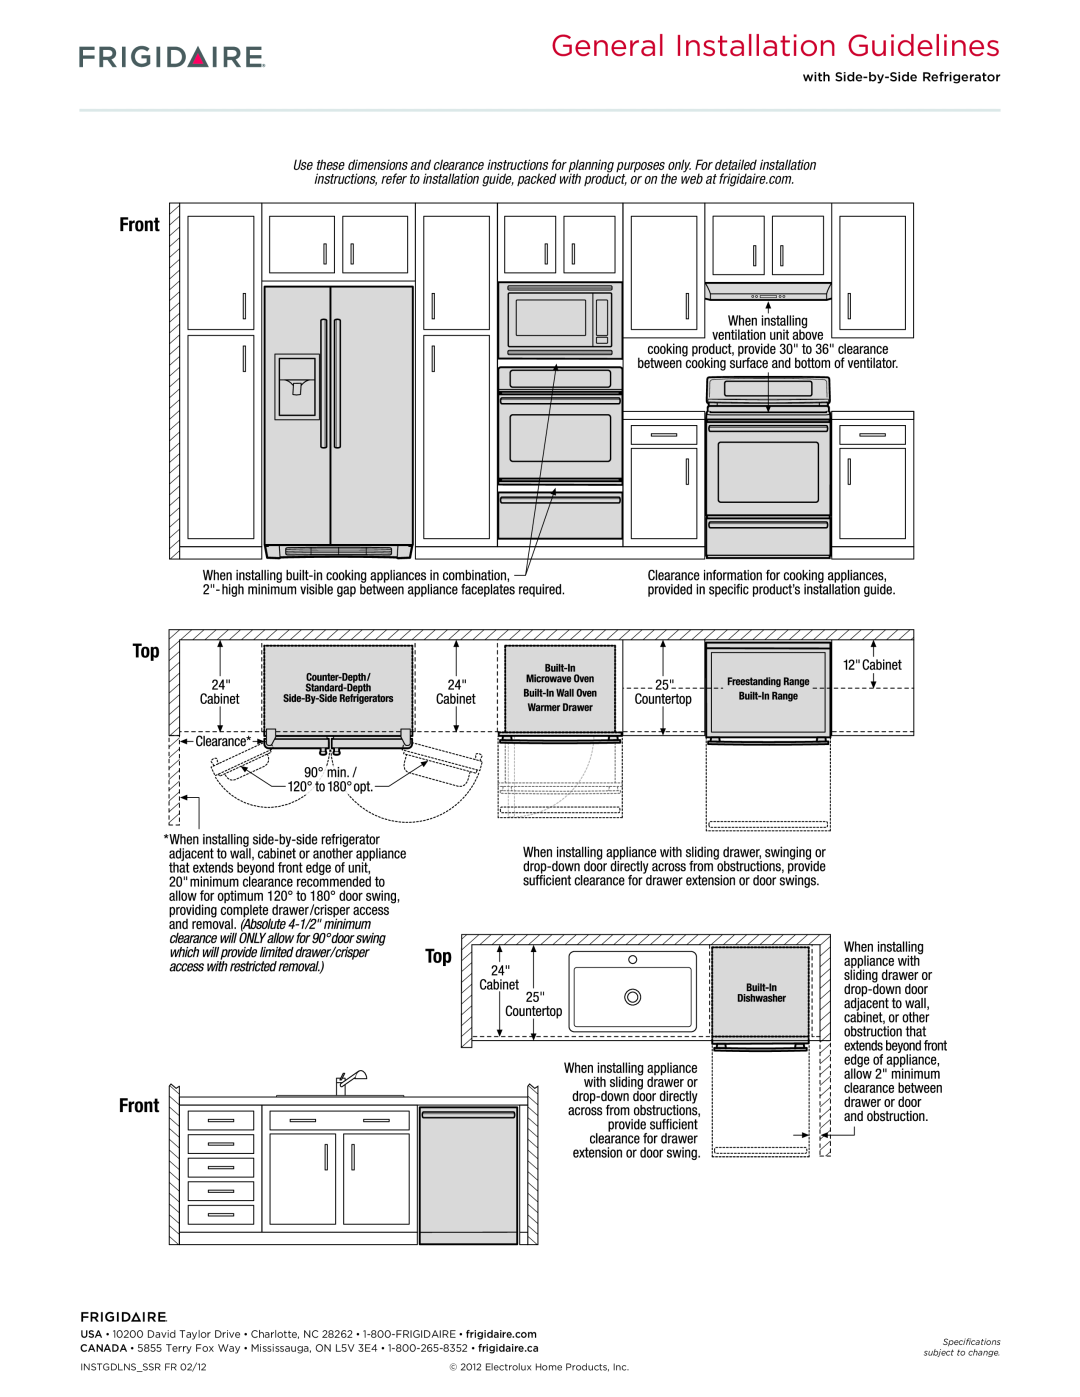 Frigidaire FPET2785K F dimensions General Installation Guidelines, Top Front 